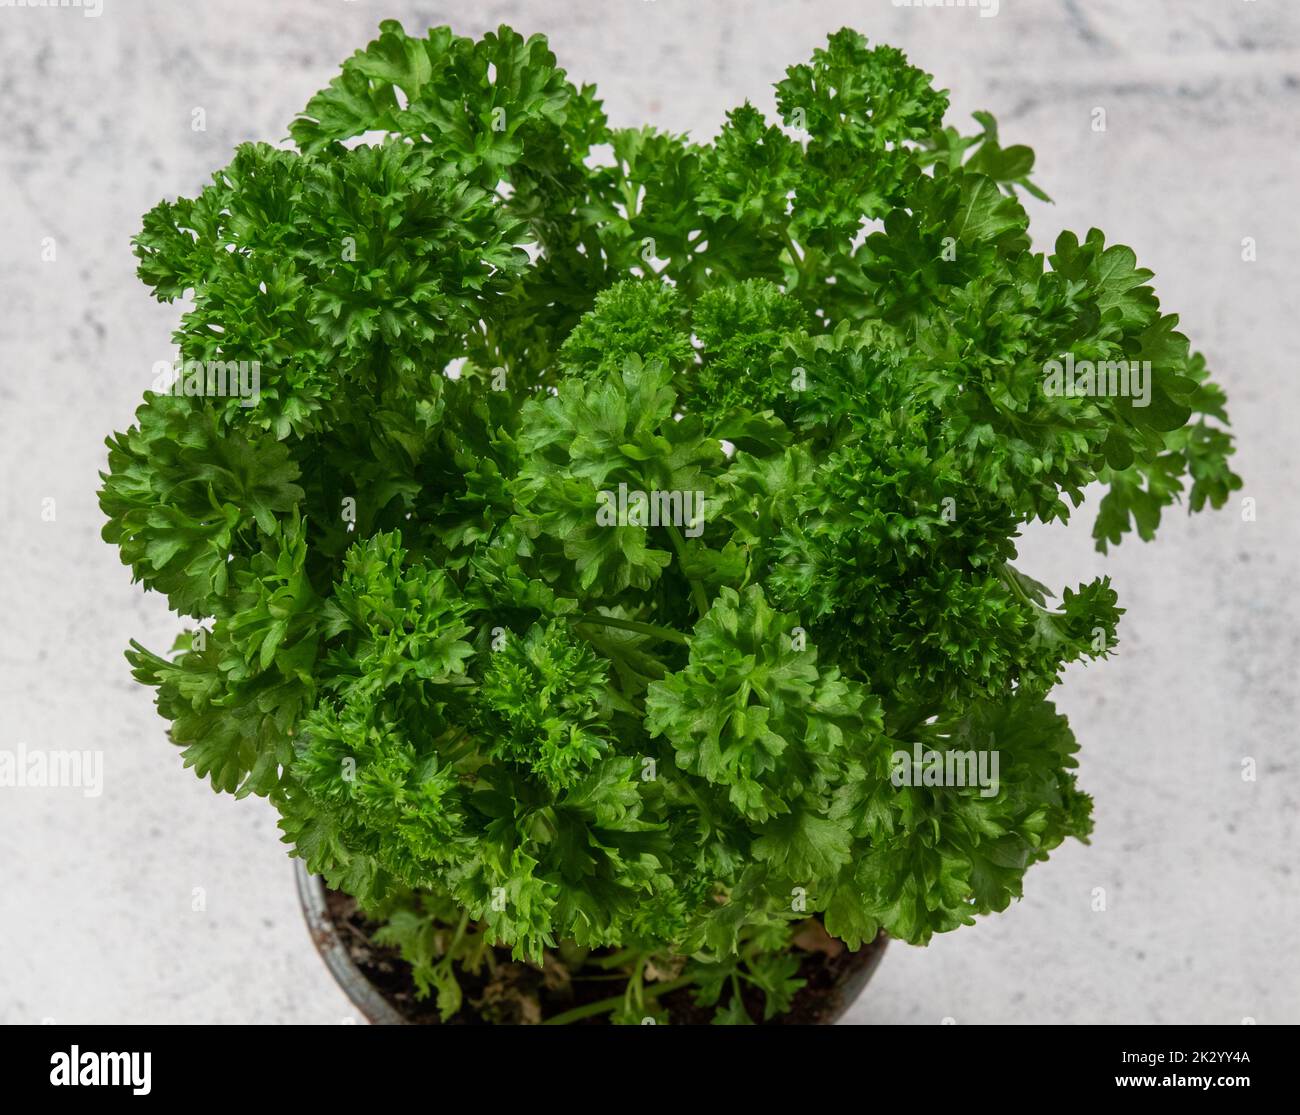 Curly leaf parsley Stock Photo